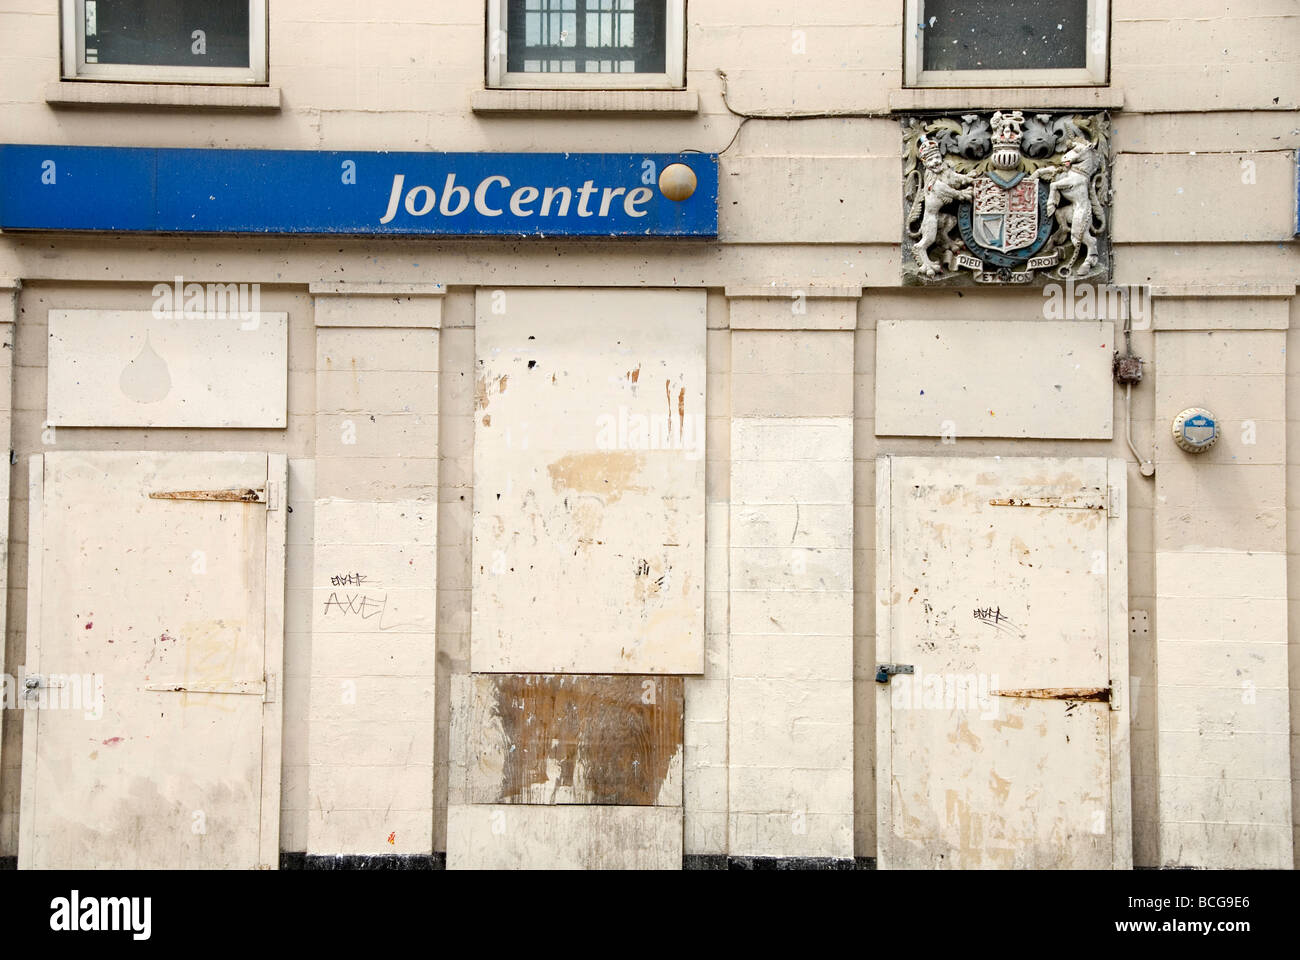 Shoreditch Closed and boarded up job centre Stock Photo